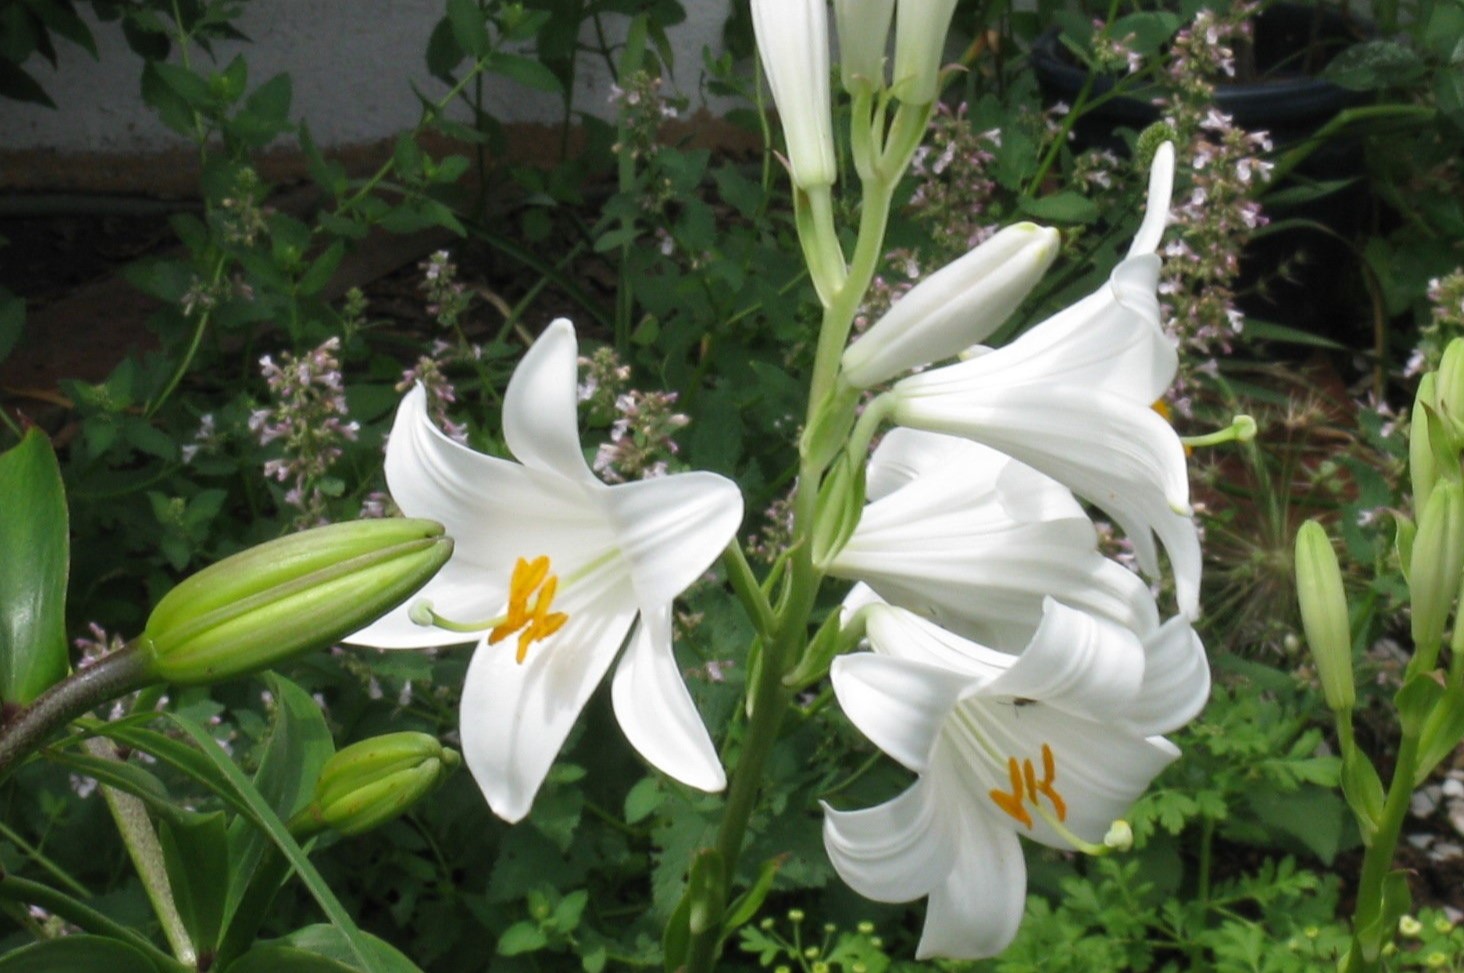 What Are Seeds In Lily Bloom